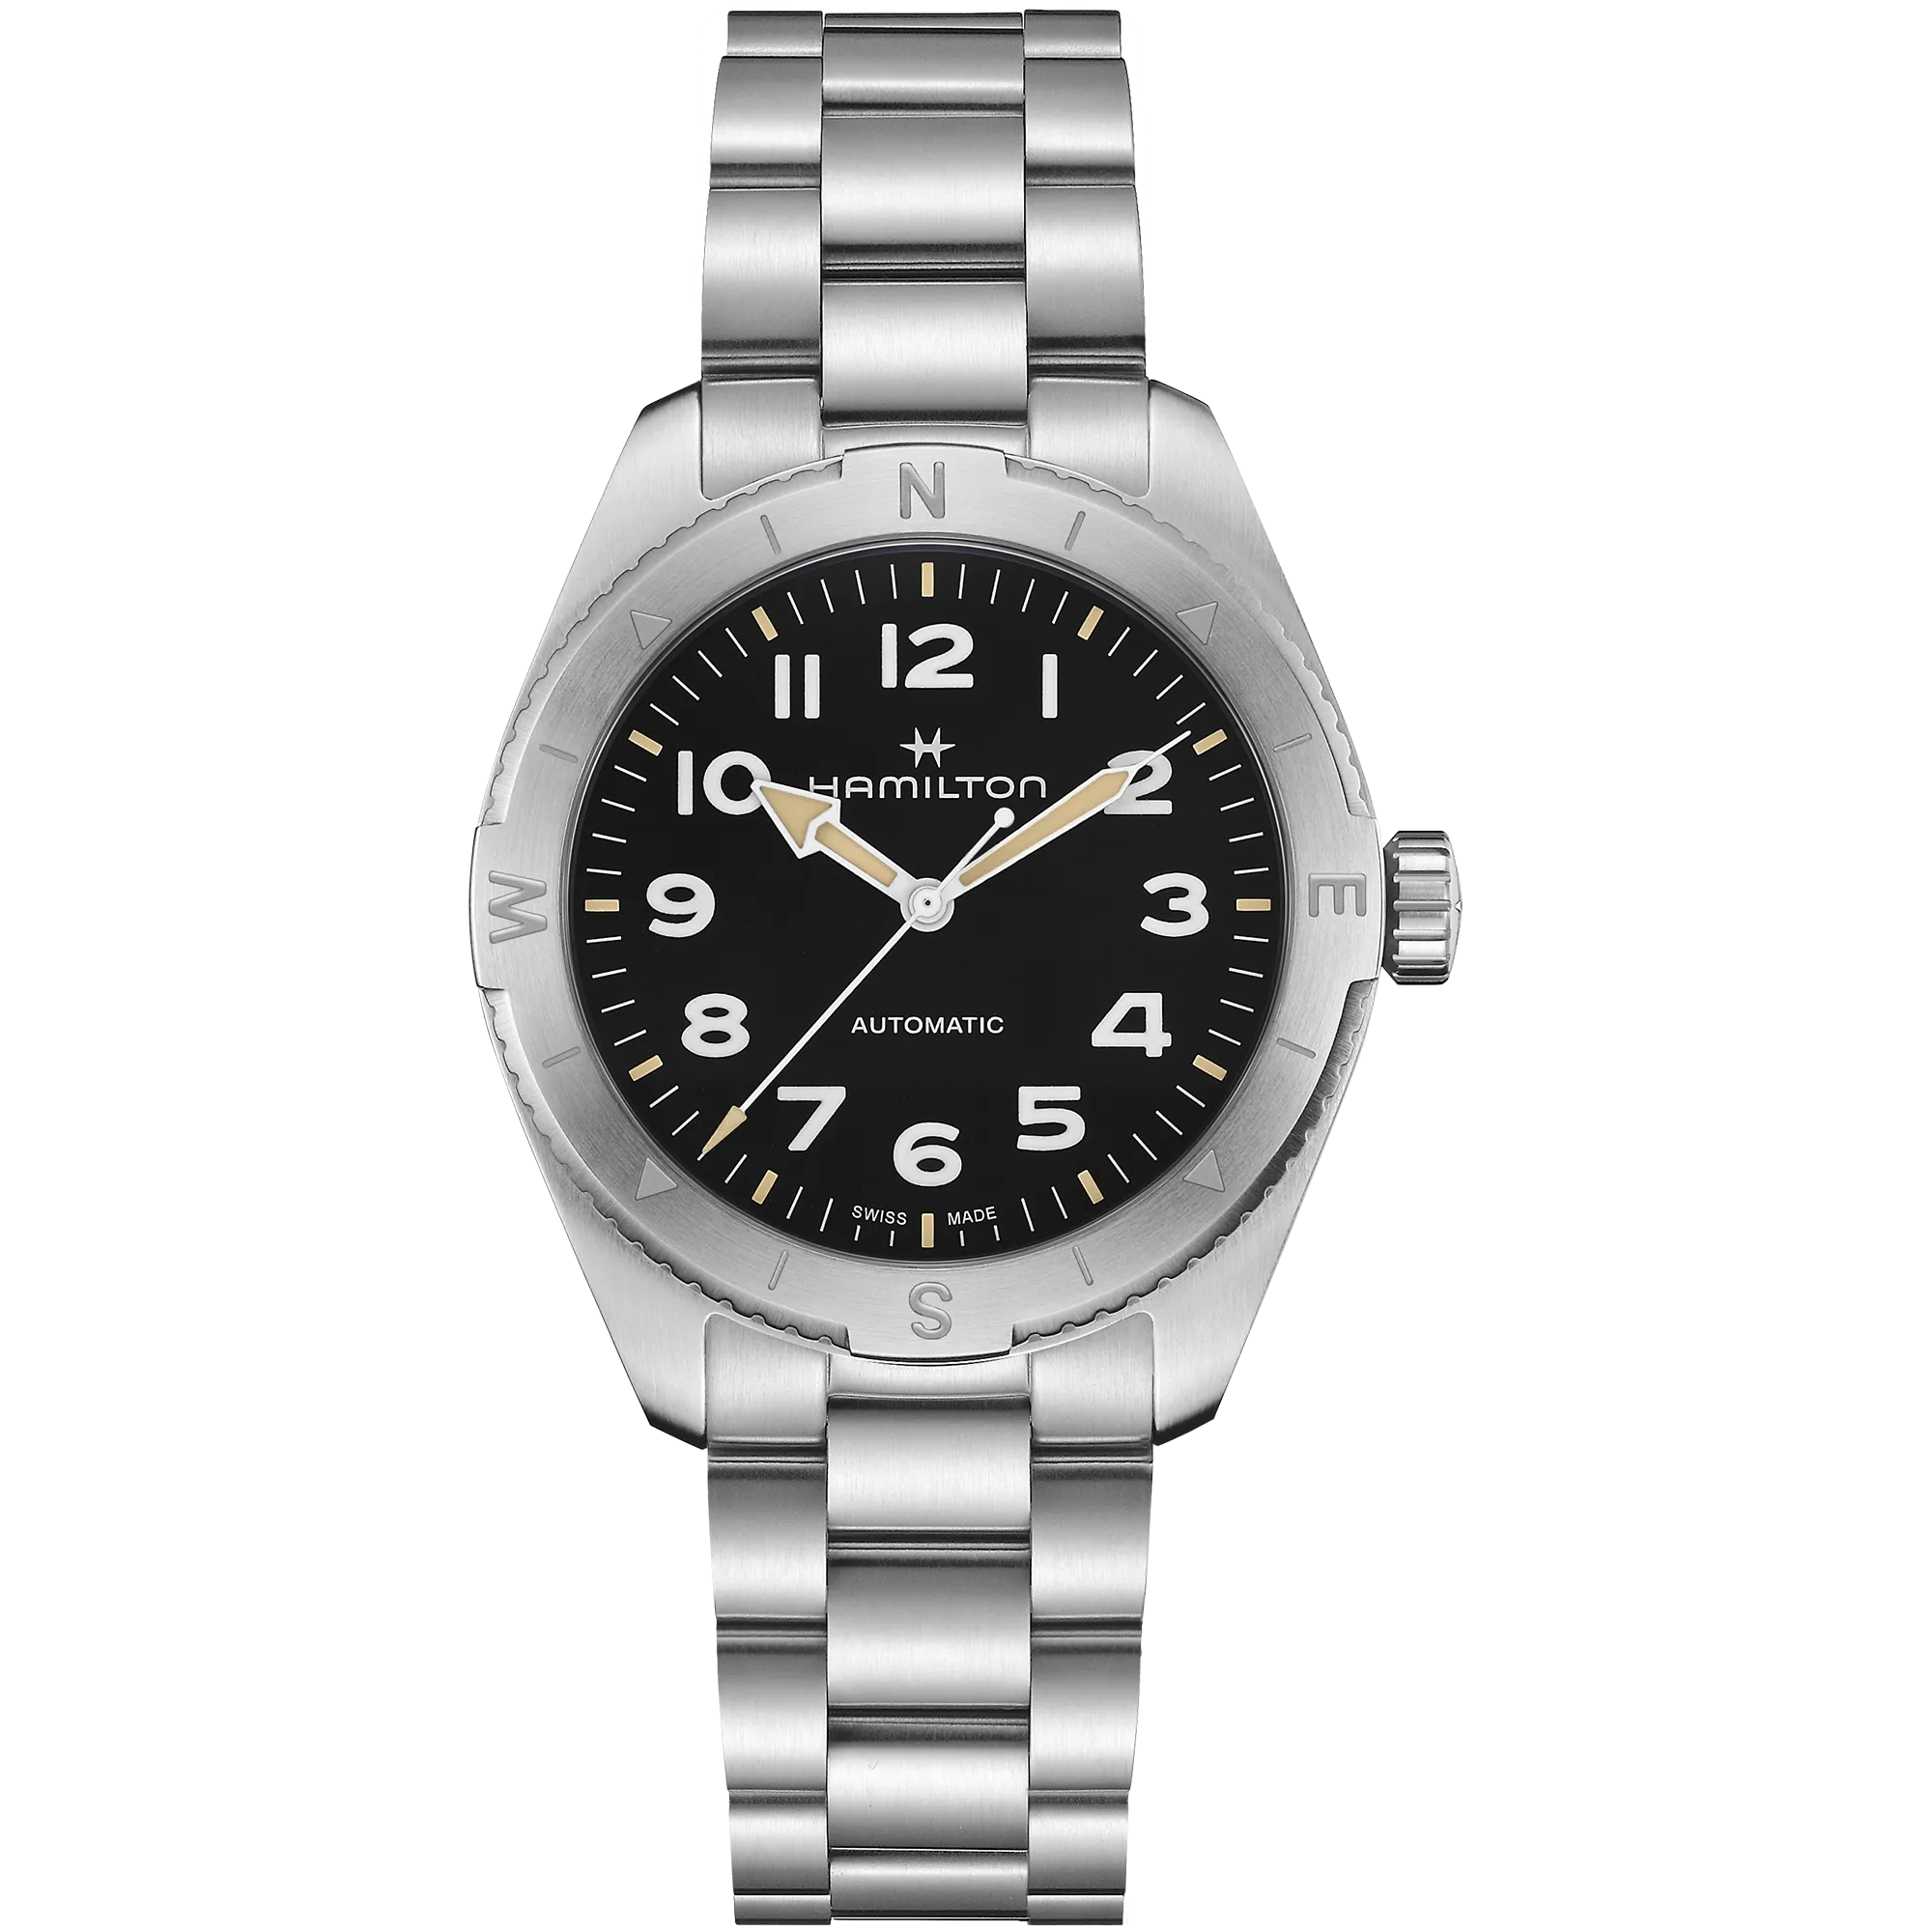 Khaki Field Expedition Auto - 41mm - H70315130